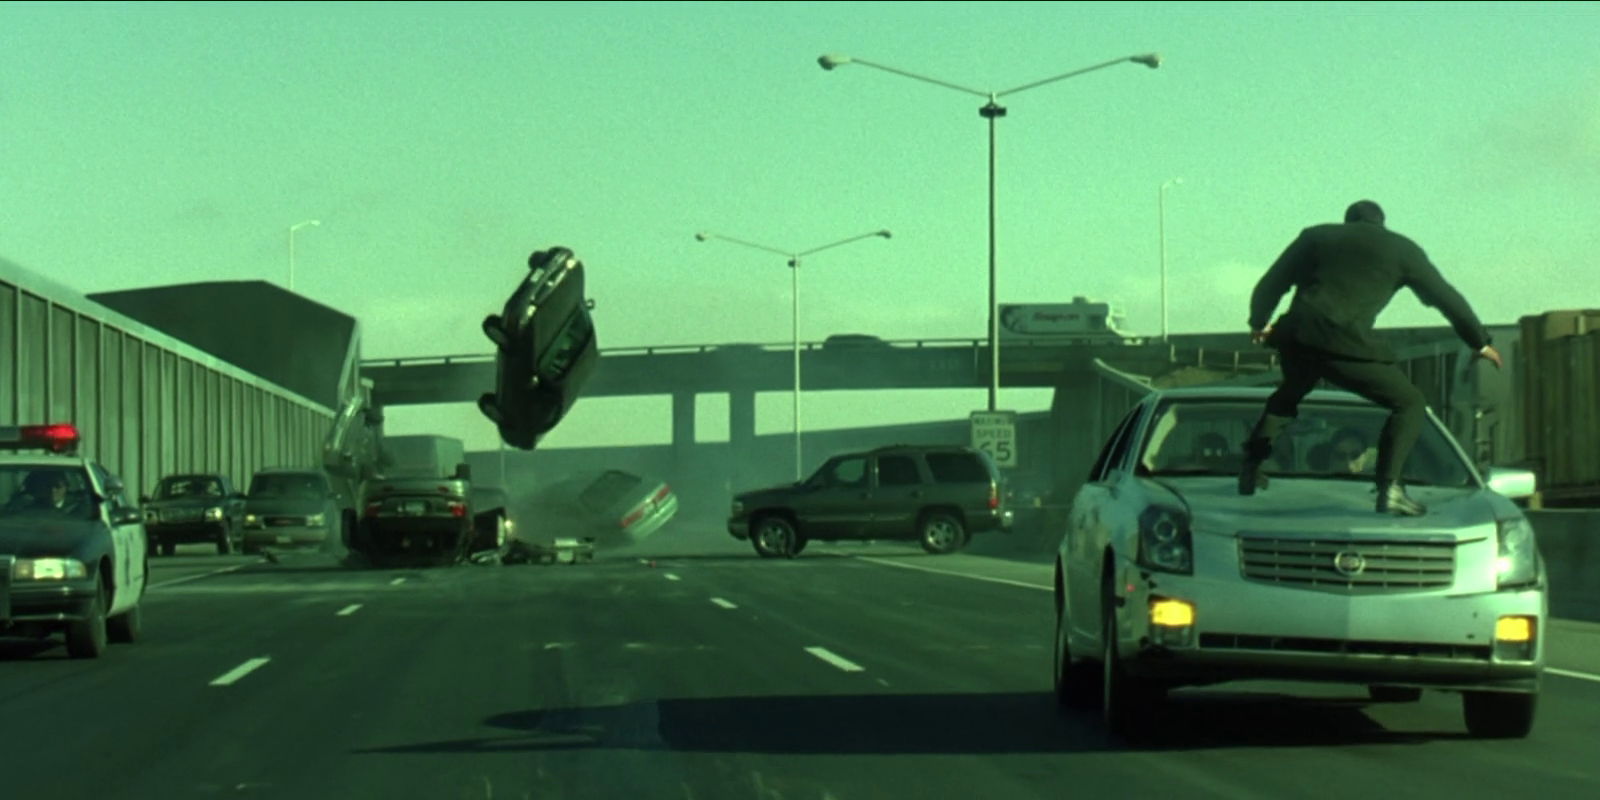 Matrix Reloaded freeway chase sequence